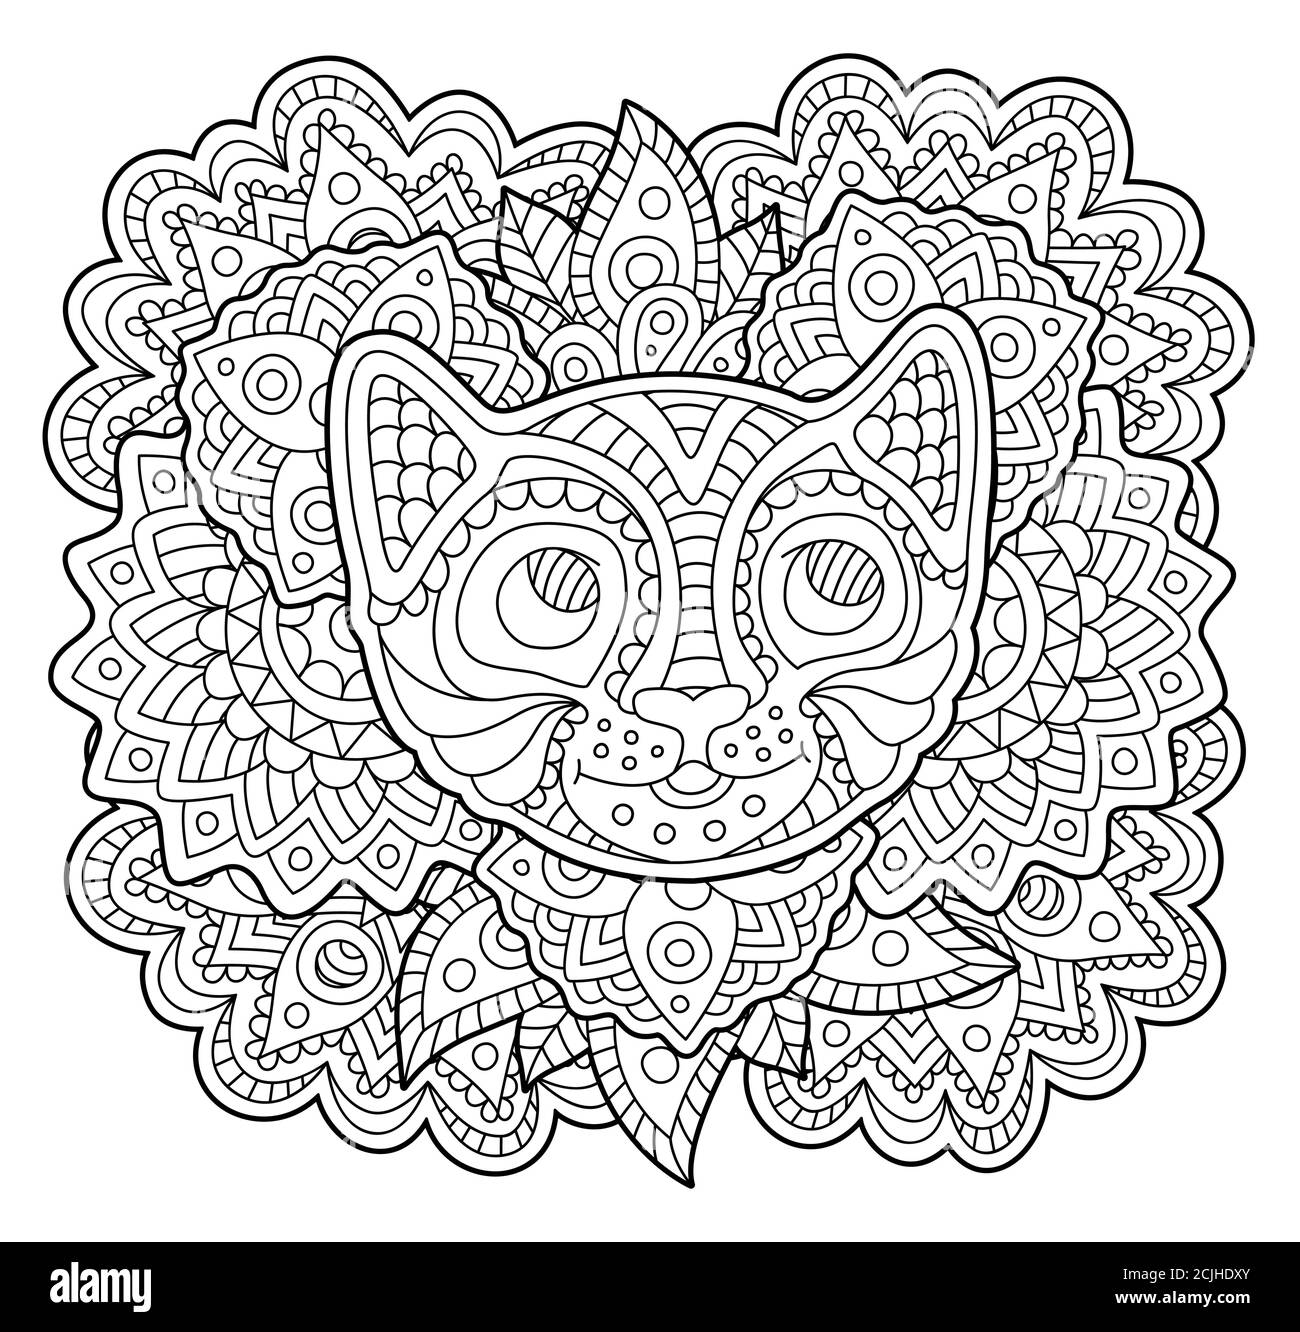 Coloring book page with stylized kitten face on beautiful abstract pattern Stock Vector